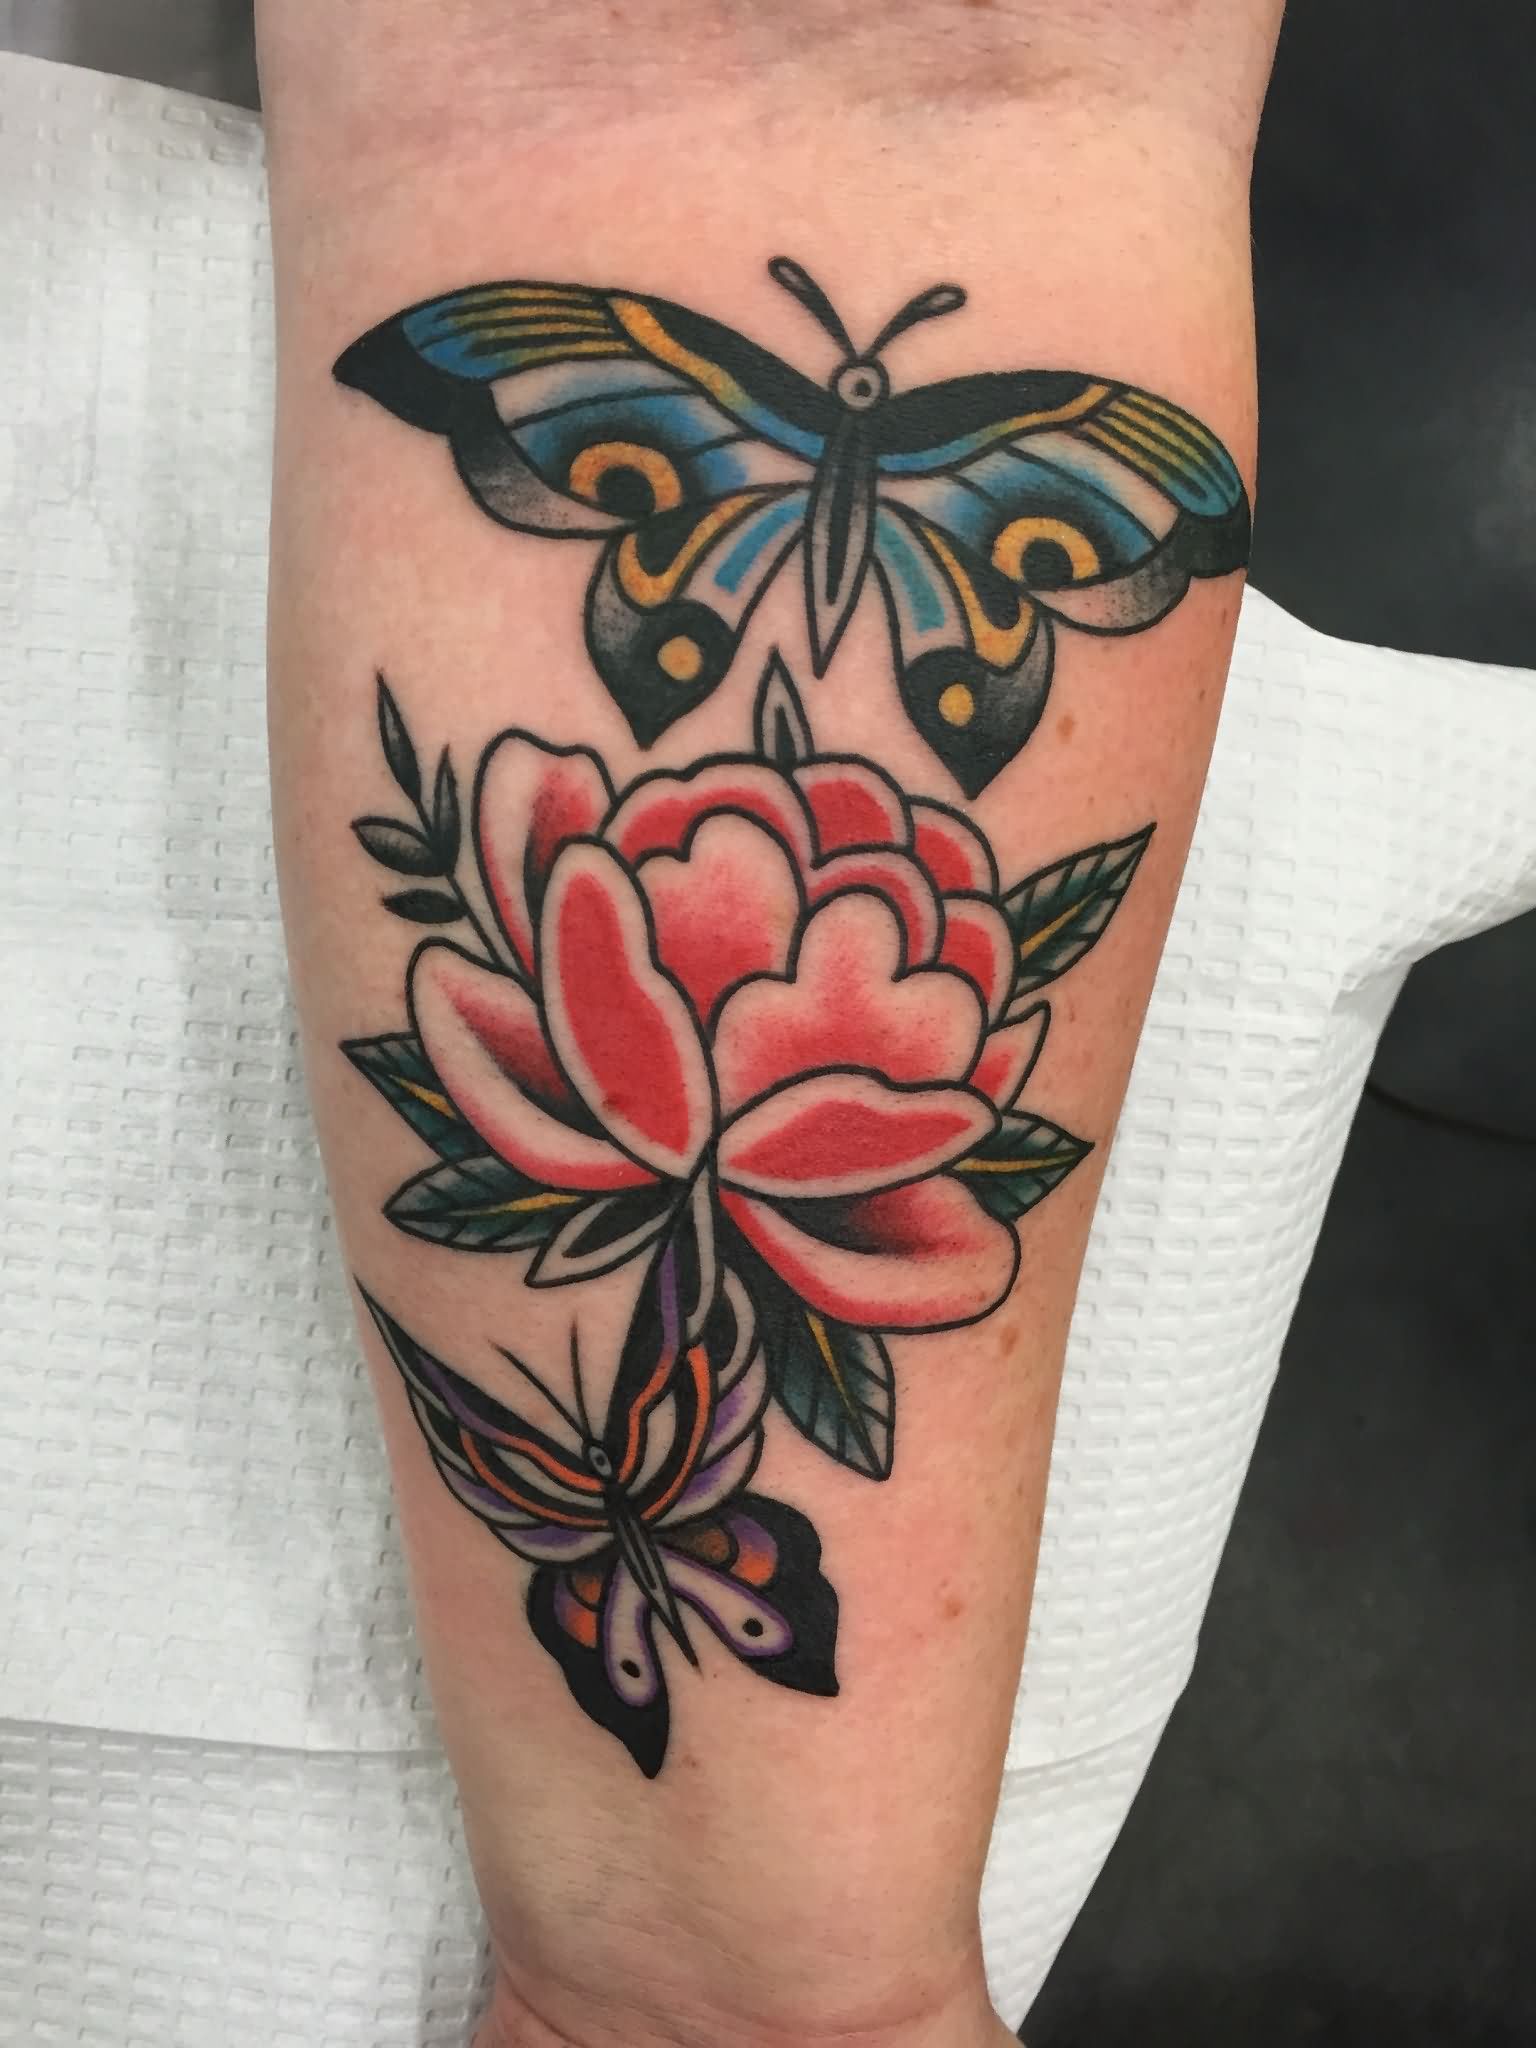 Traditional Flower With Two Flying Butterflies Tattoo On Forearm